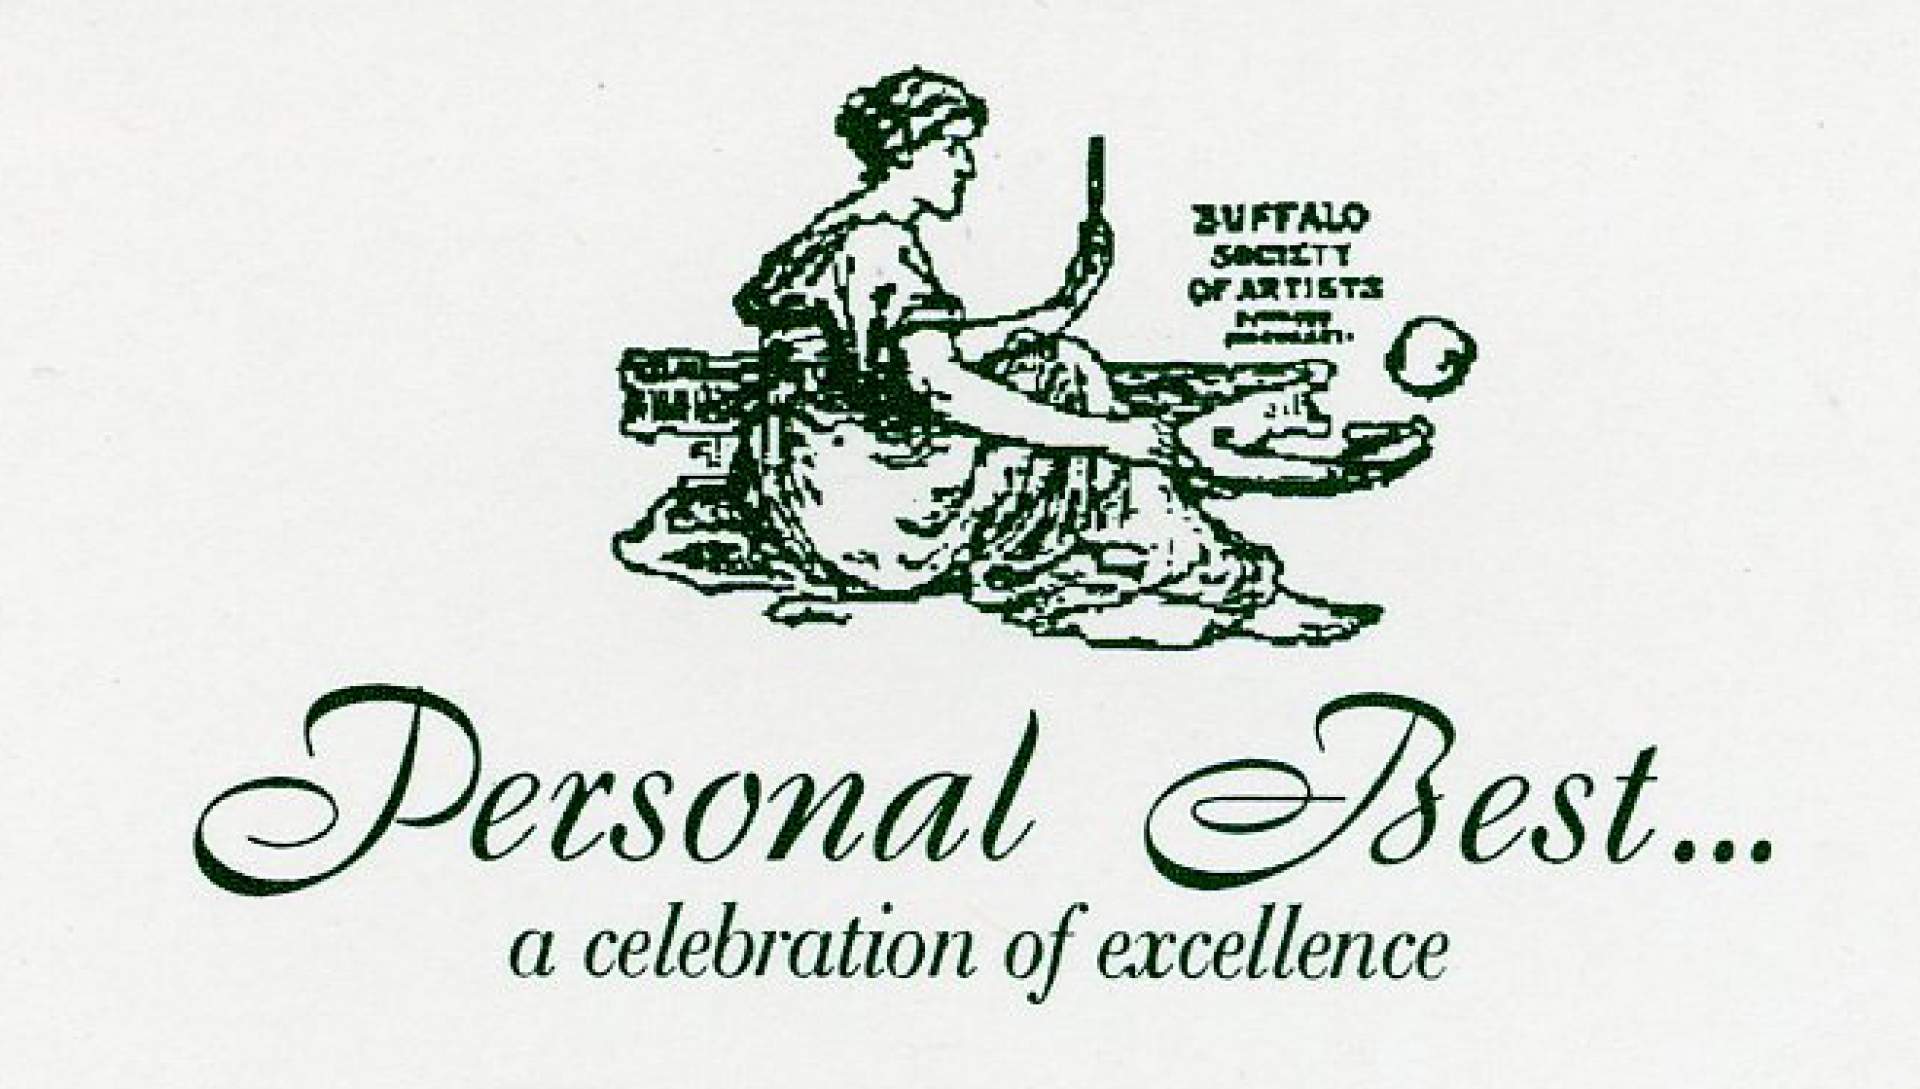 Personal Best: Buffalo Society of Artists' 100th Annual Juried Exhibition